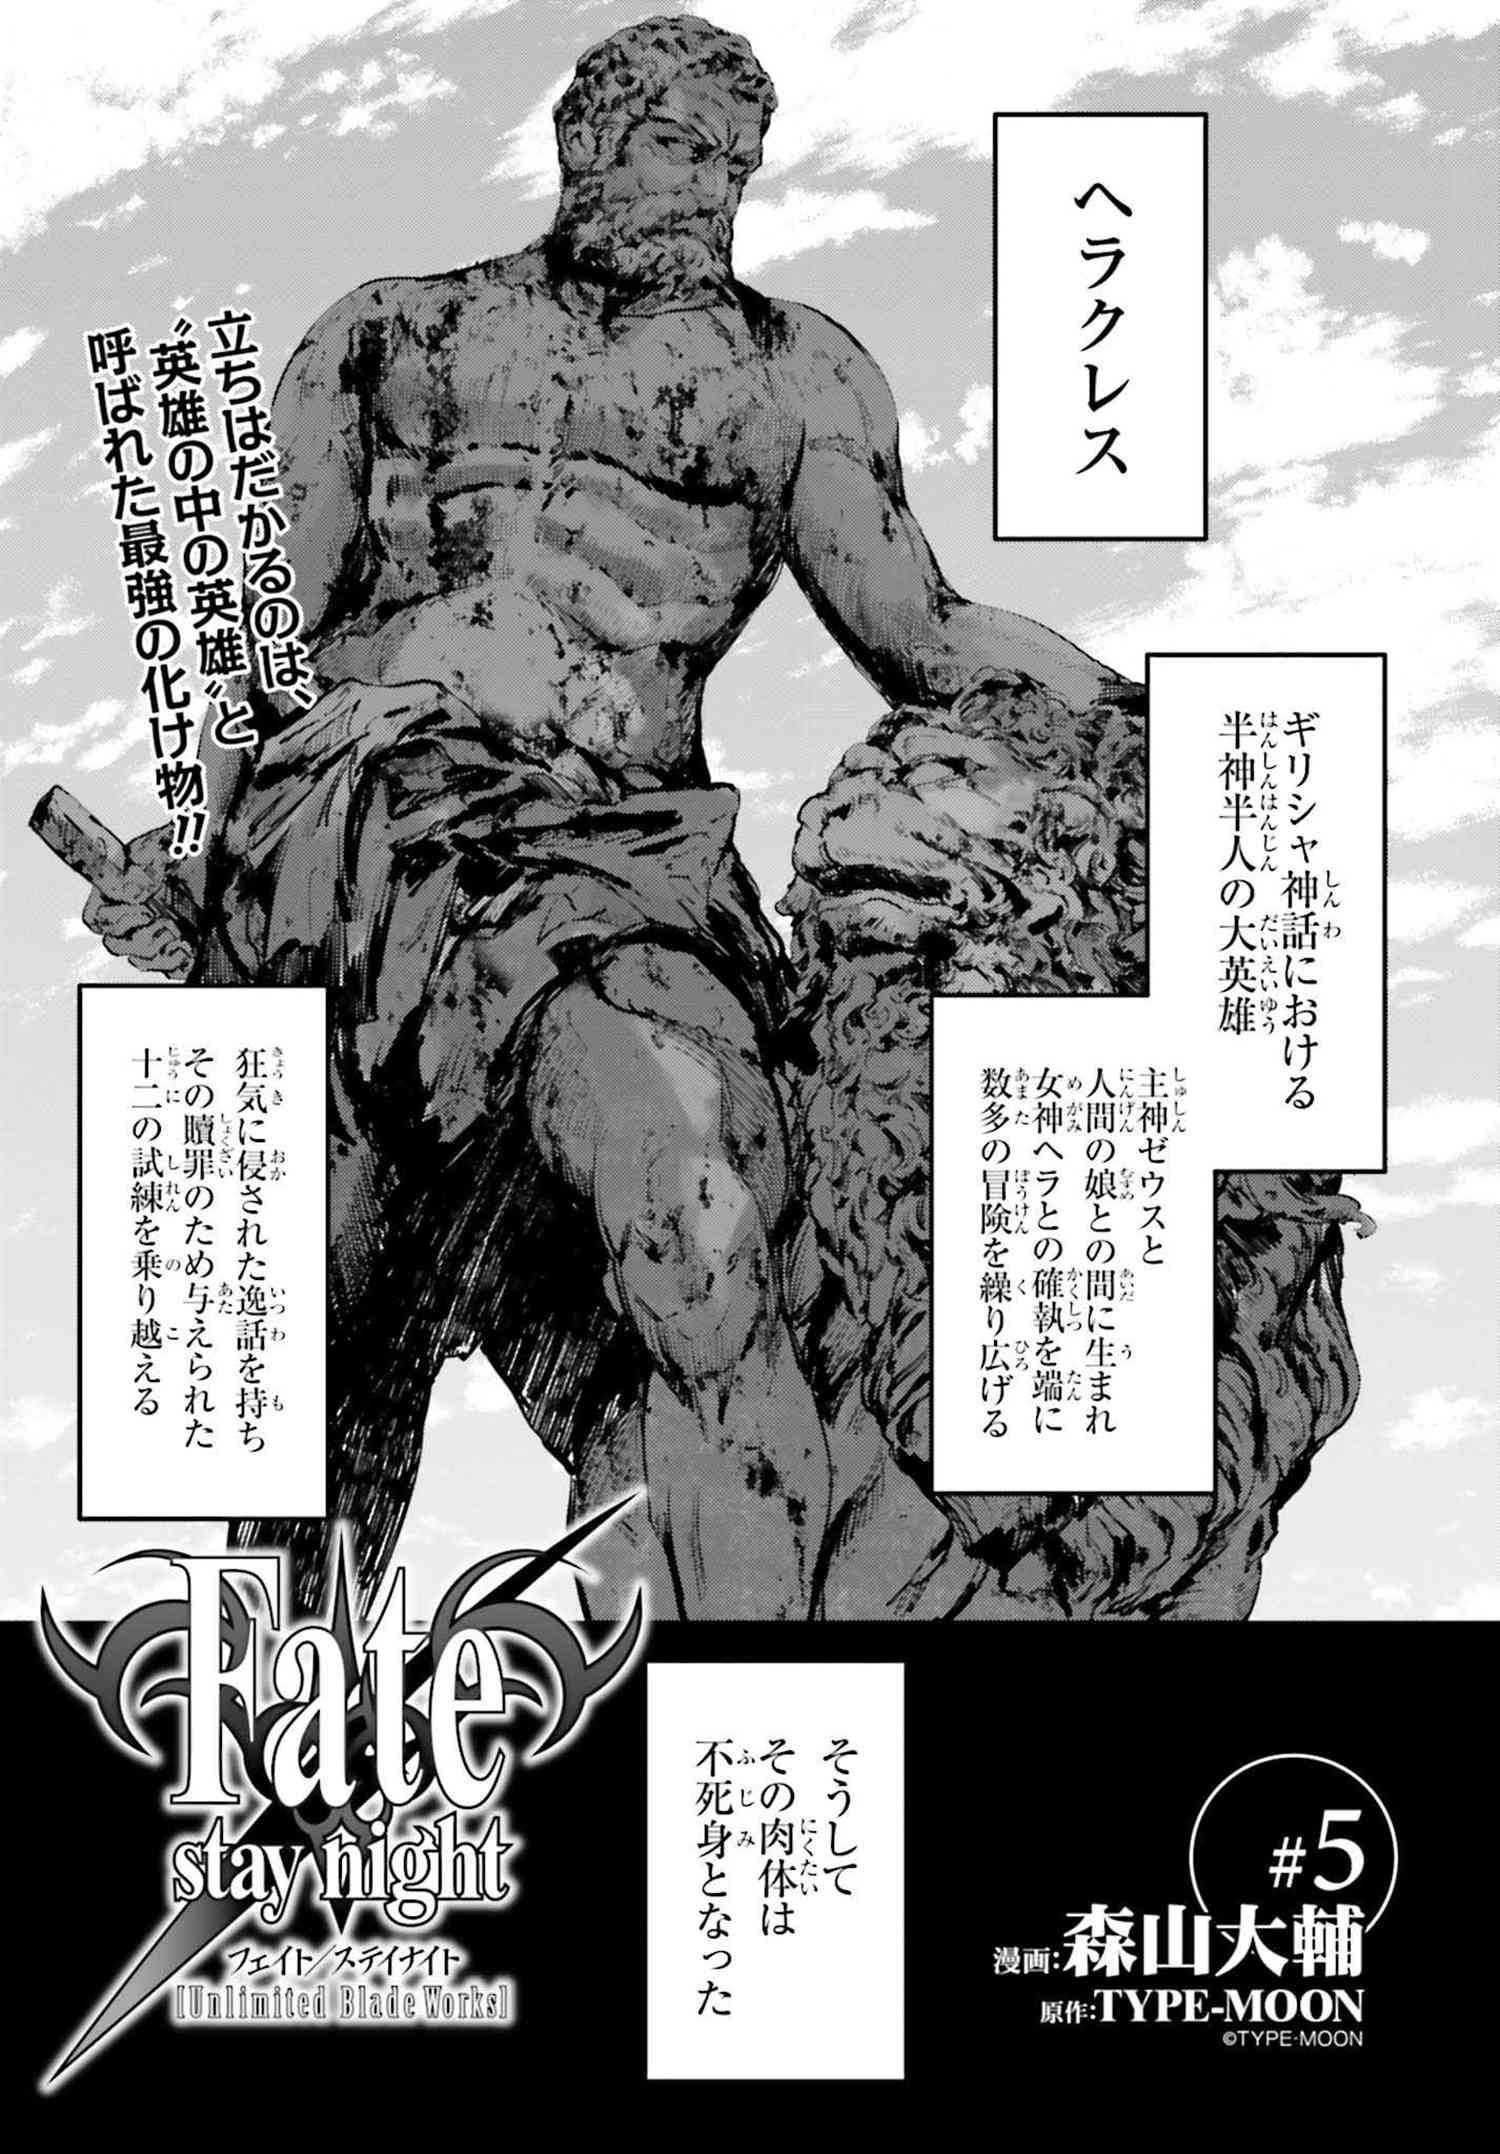 Fate Stay Night Unlimited Blade Works 5 1 Type Moonコミックエース 無料で漫画が読めるオンラインマガジン